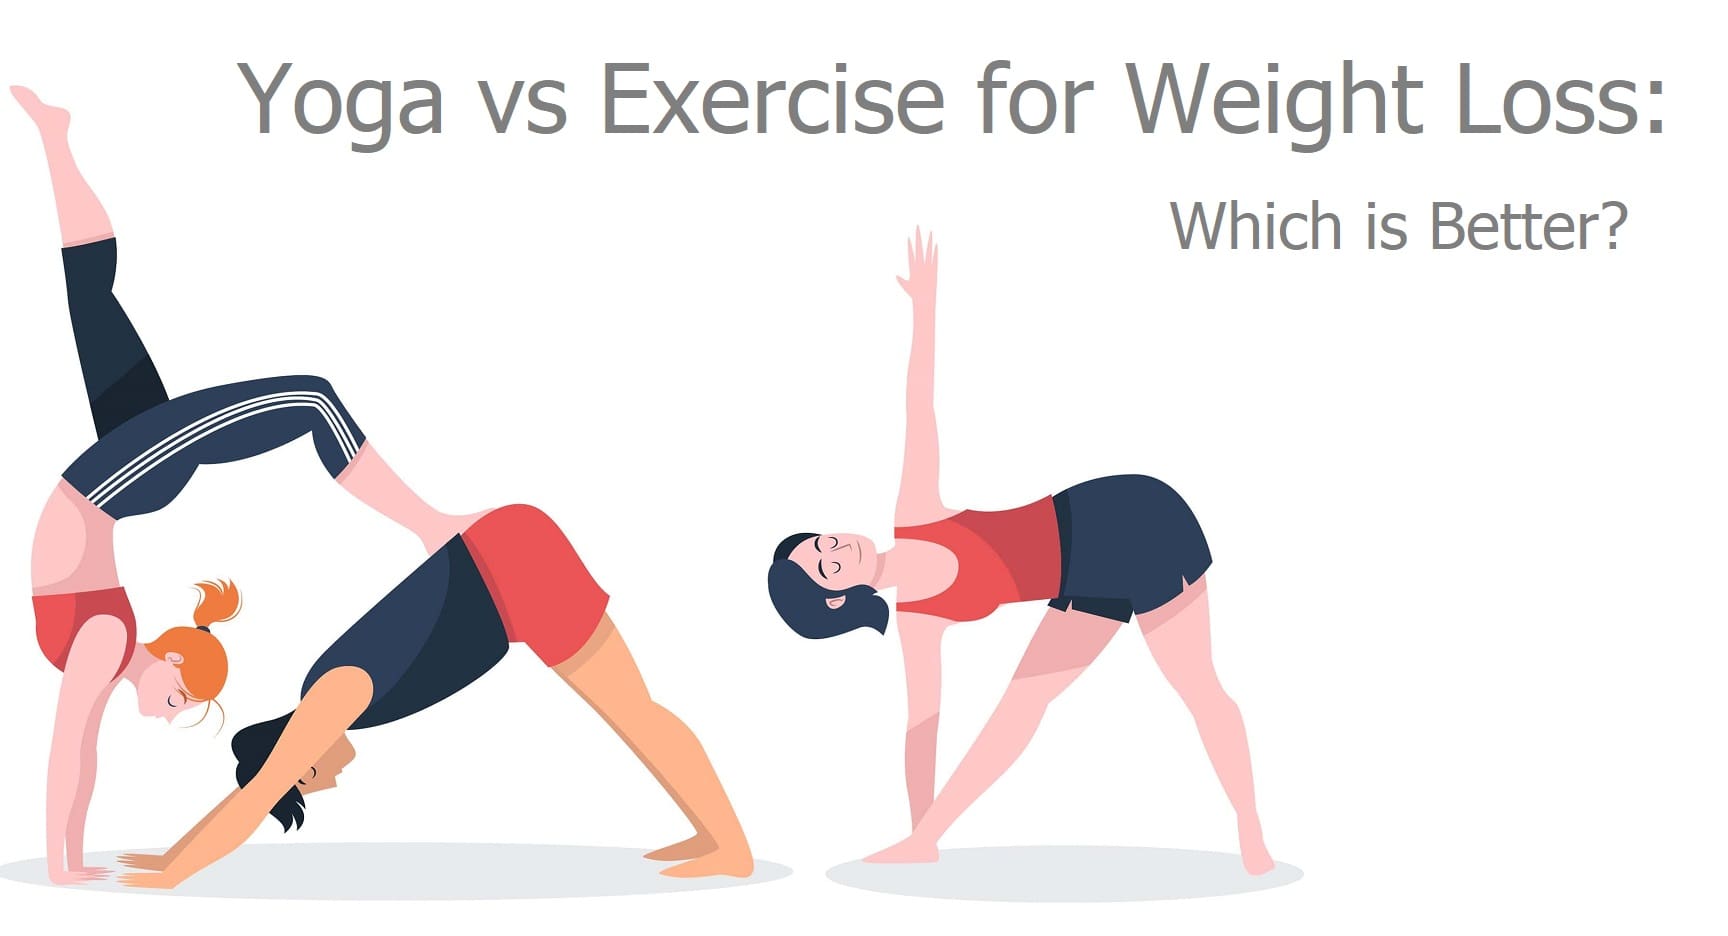 Yoga vs Exercise for Weight Loss: Which is Better